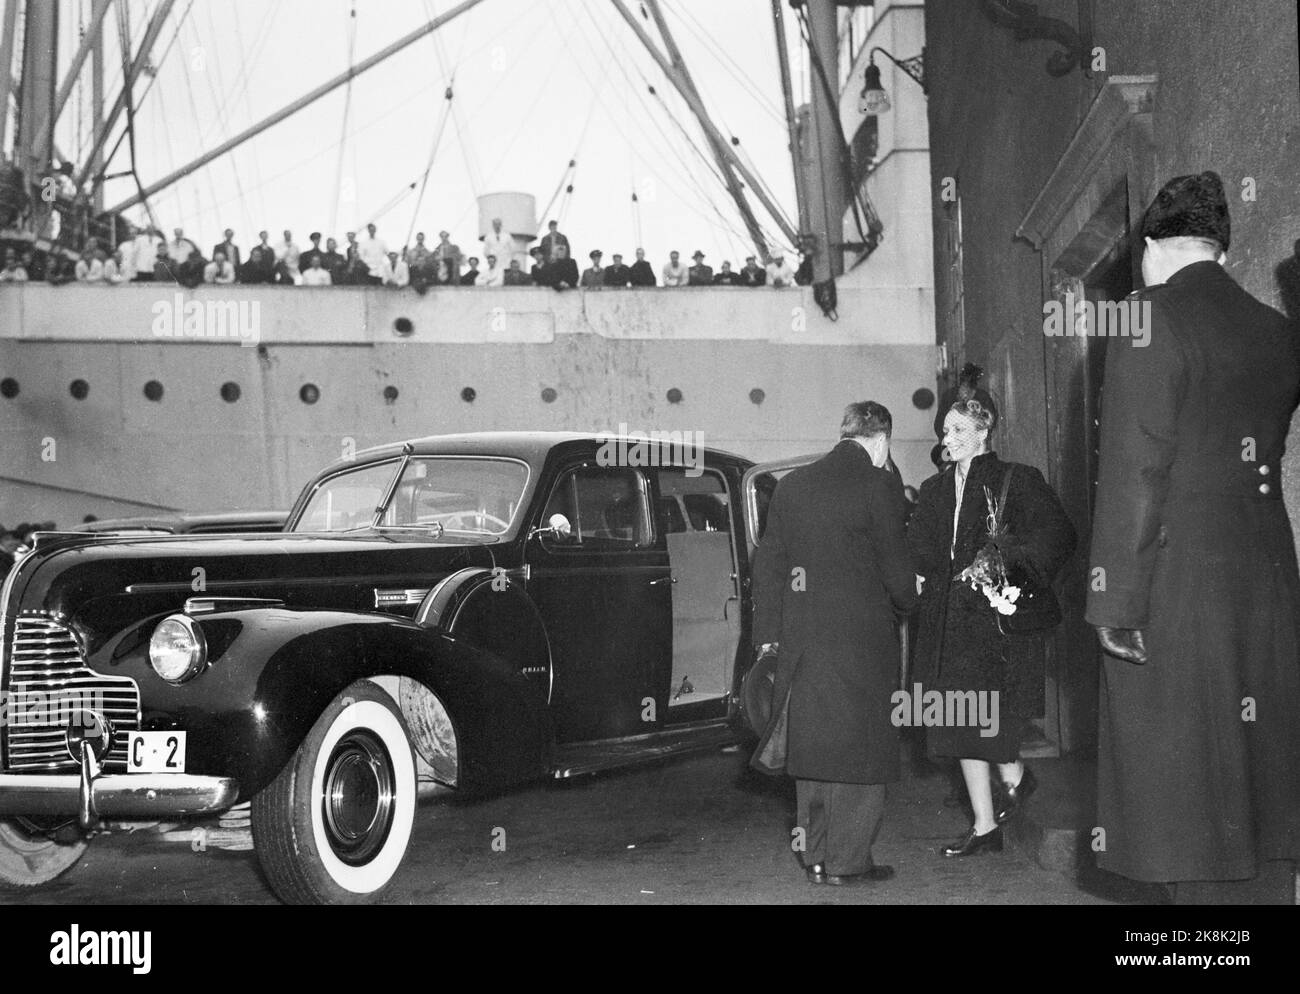 Oslo 19471217. Crown Princess Märtha returns from U.S.A. with the boat 'Stavangerfjord' Here she is welcomed home after arrival. Photo: NTB Archive / NTB Stock Photo